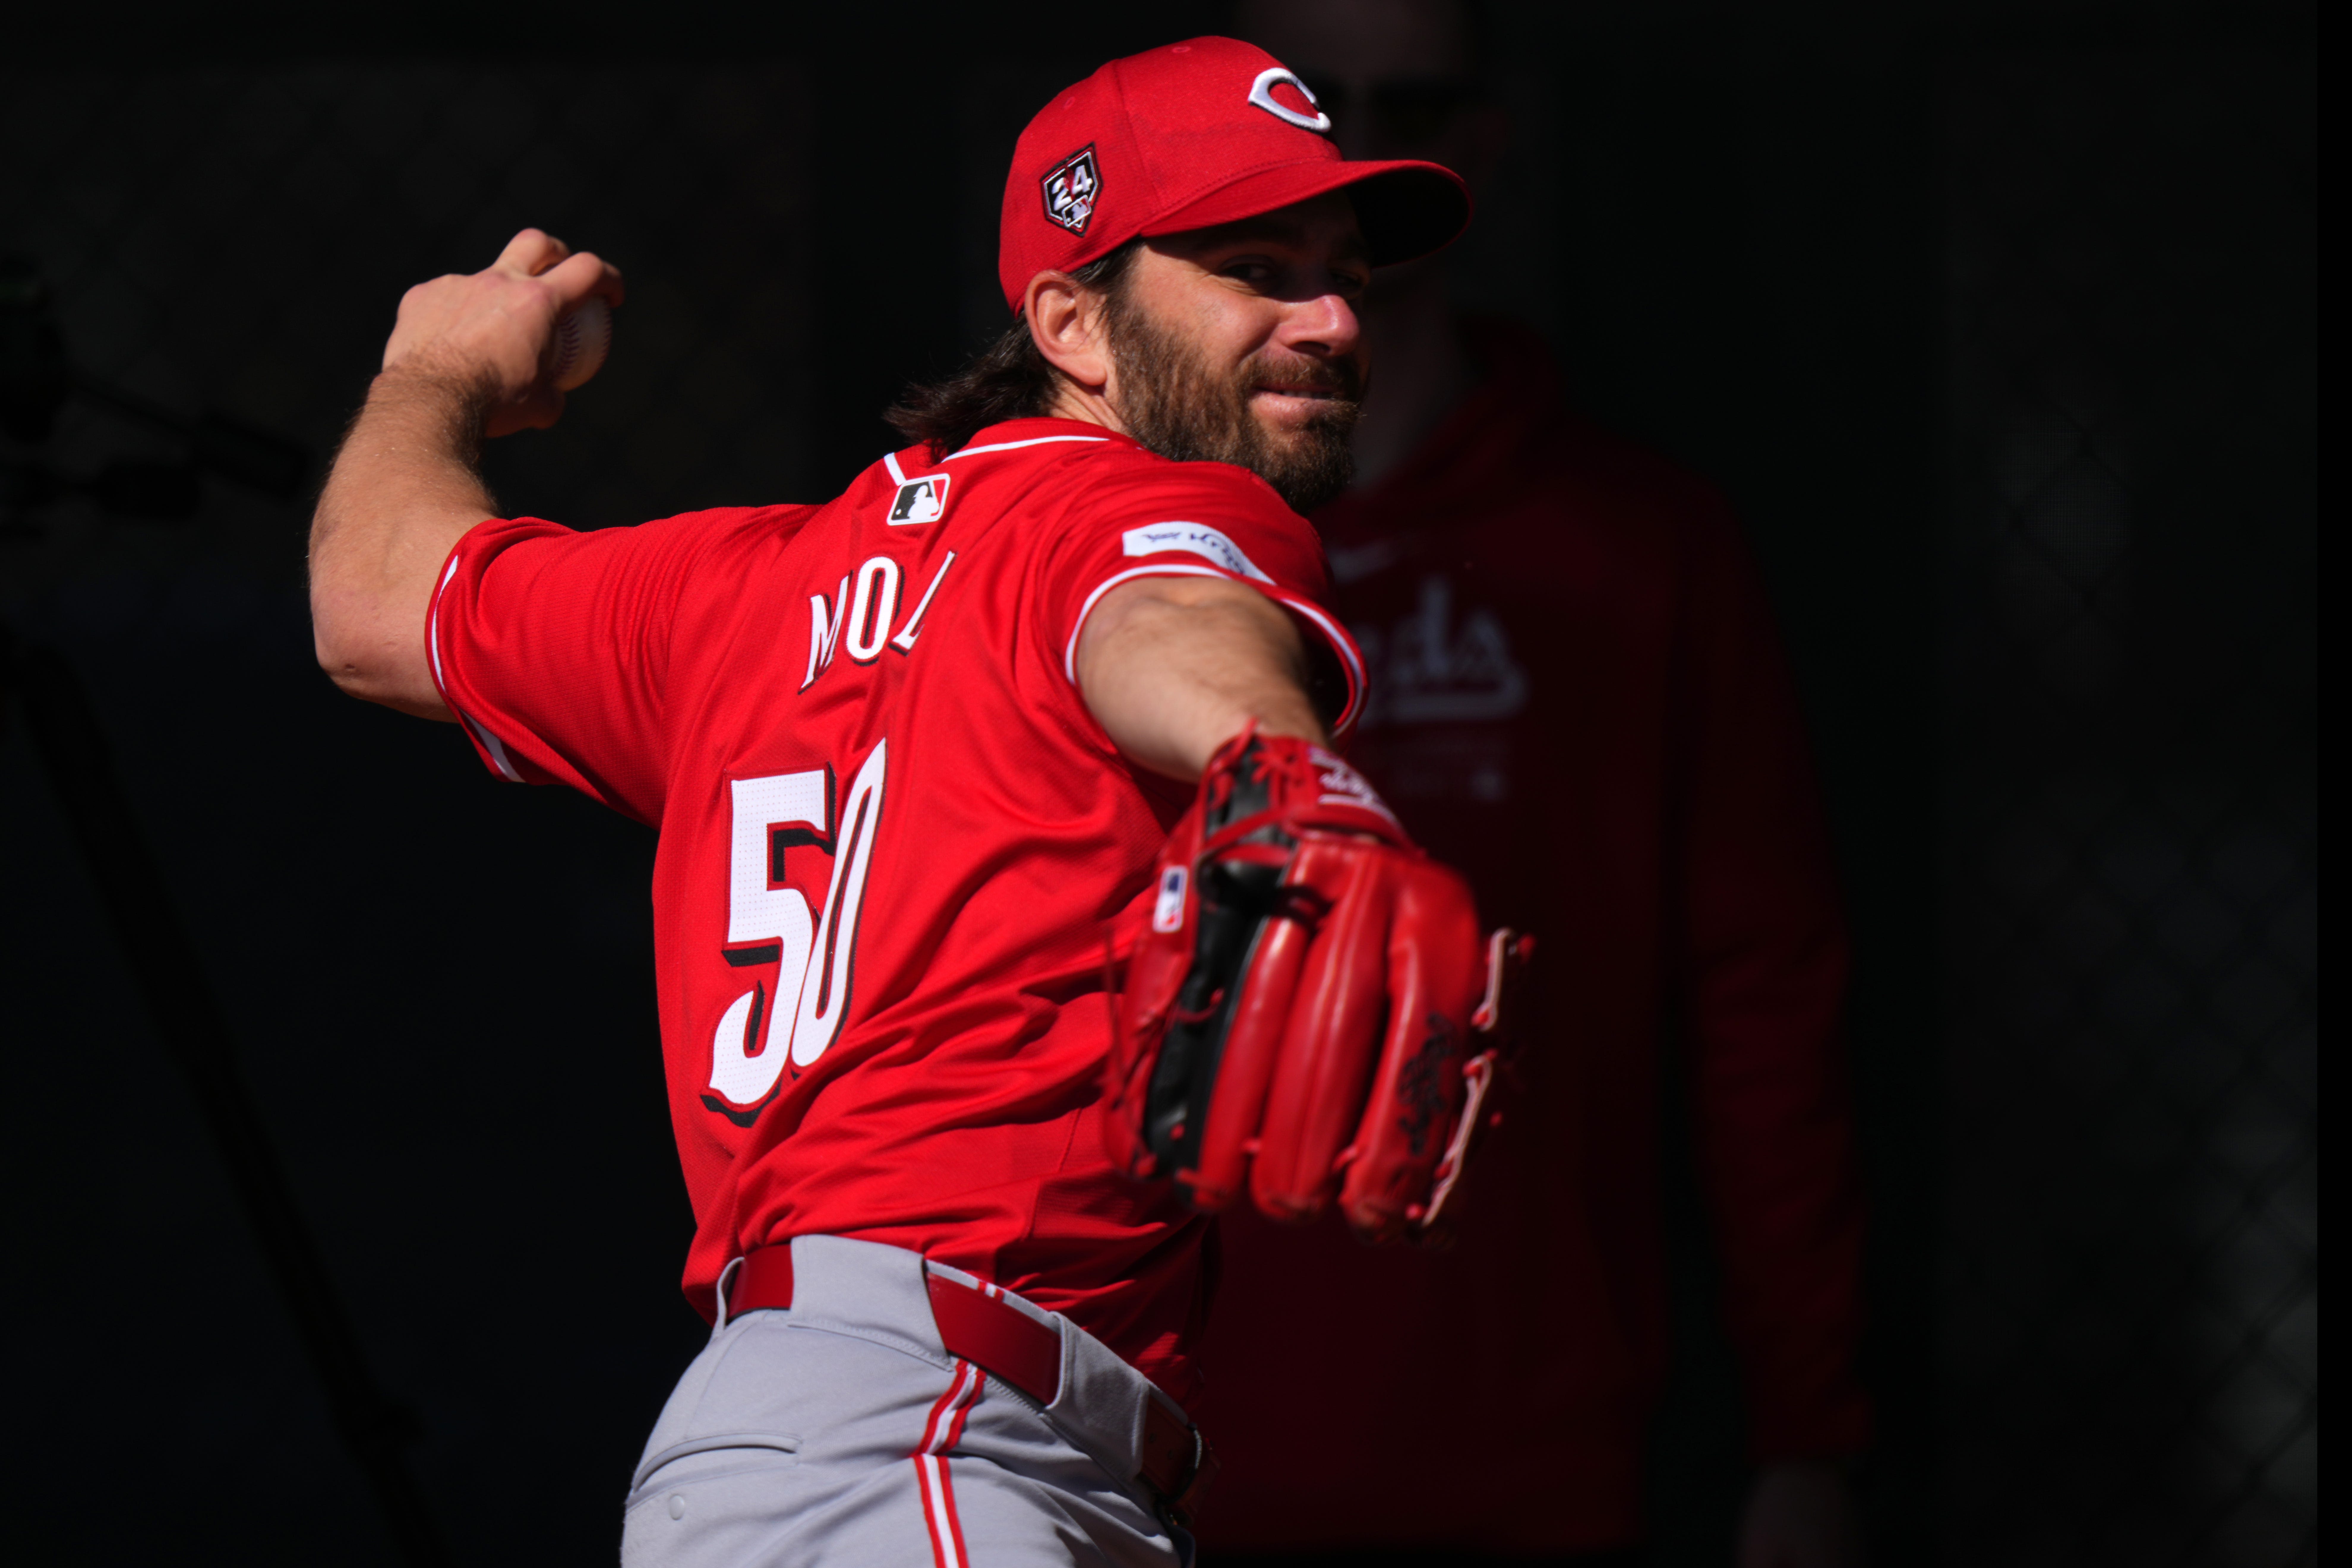 Cincinnati Reds reliever Sam Moll optioned to Louisville; Frankie Montas to be activated